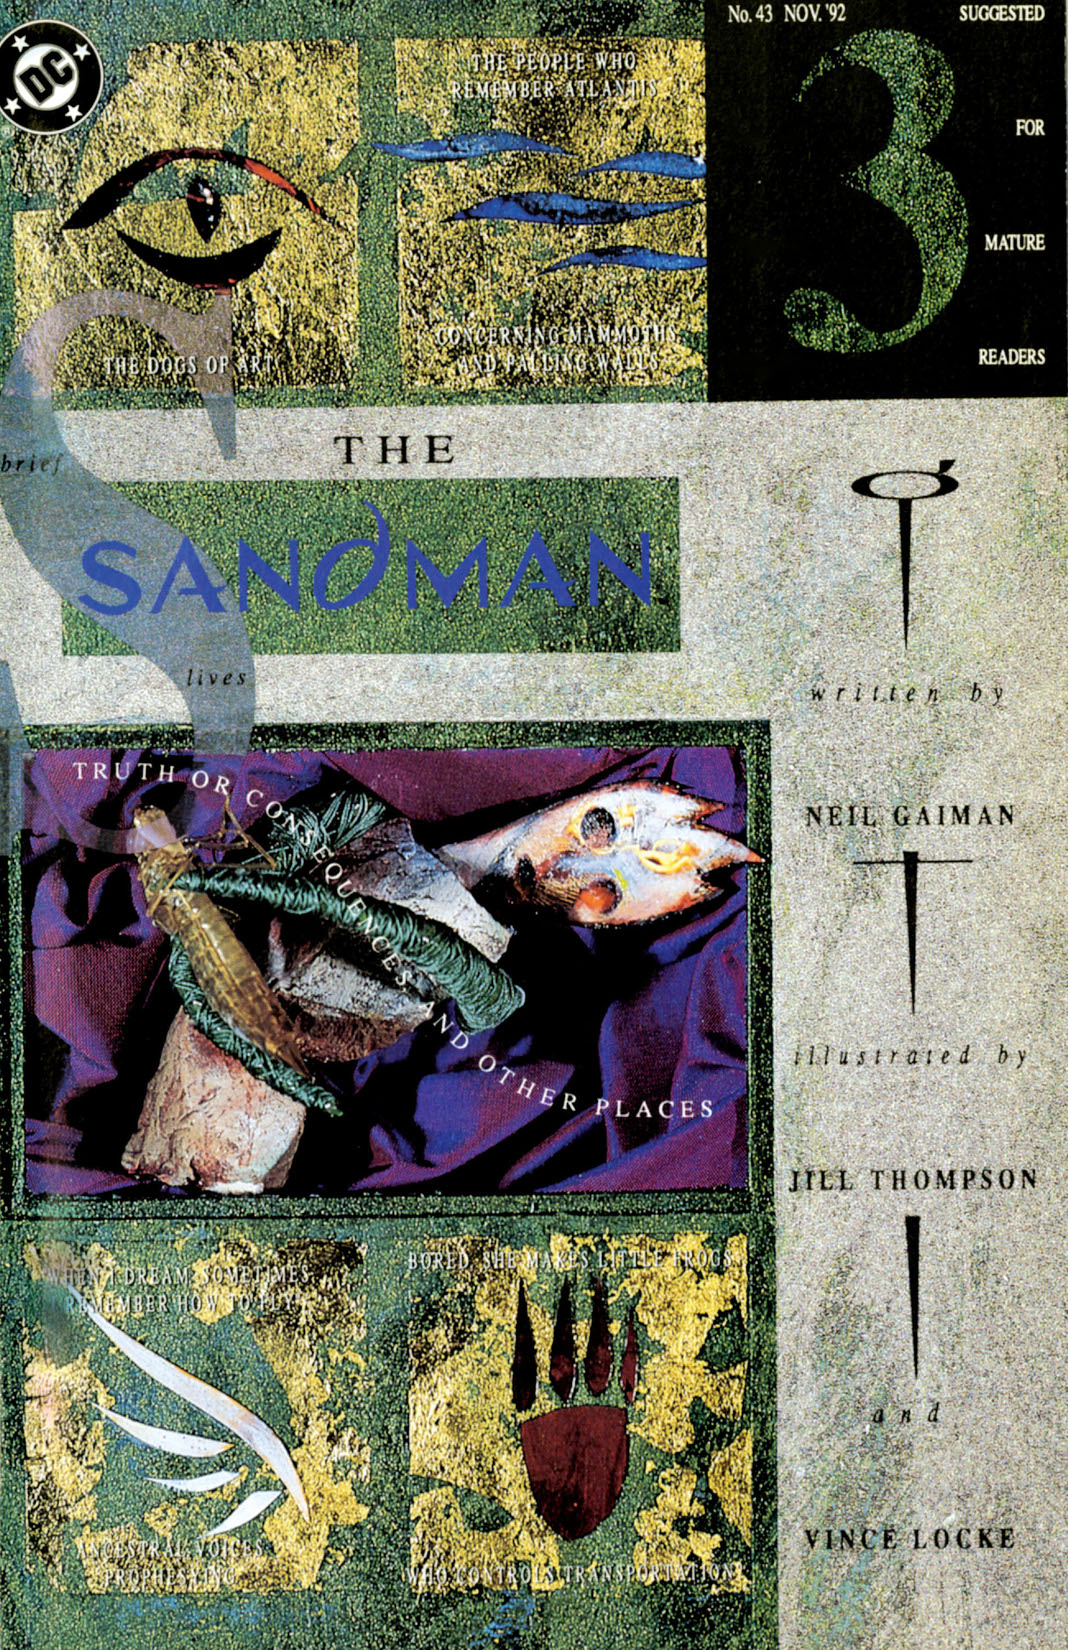 The Sandman #43 preview images